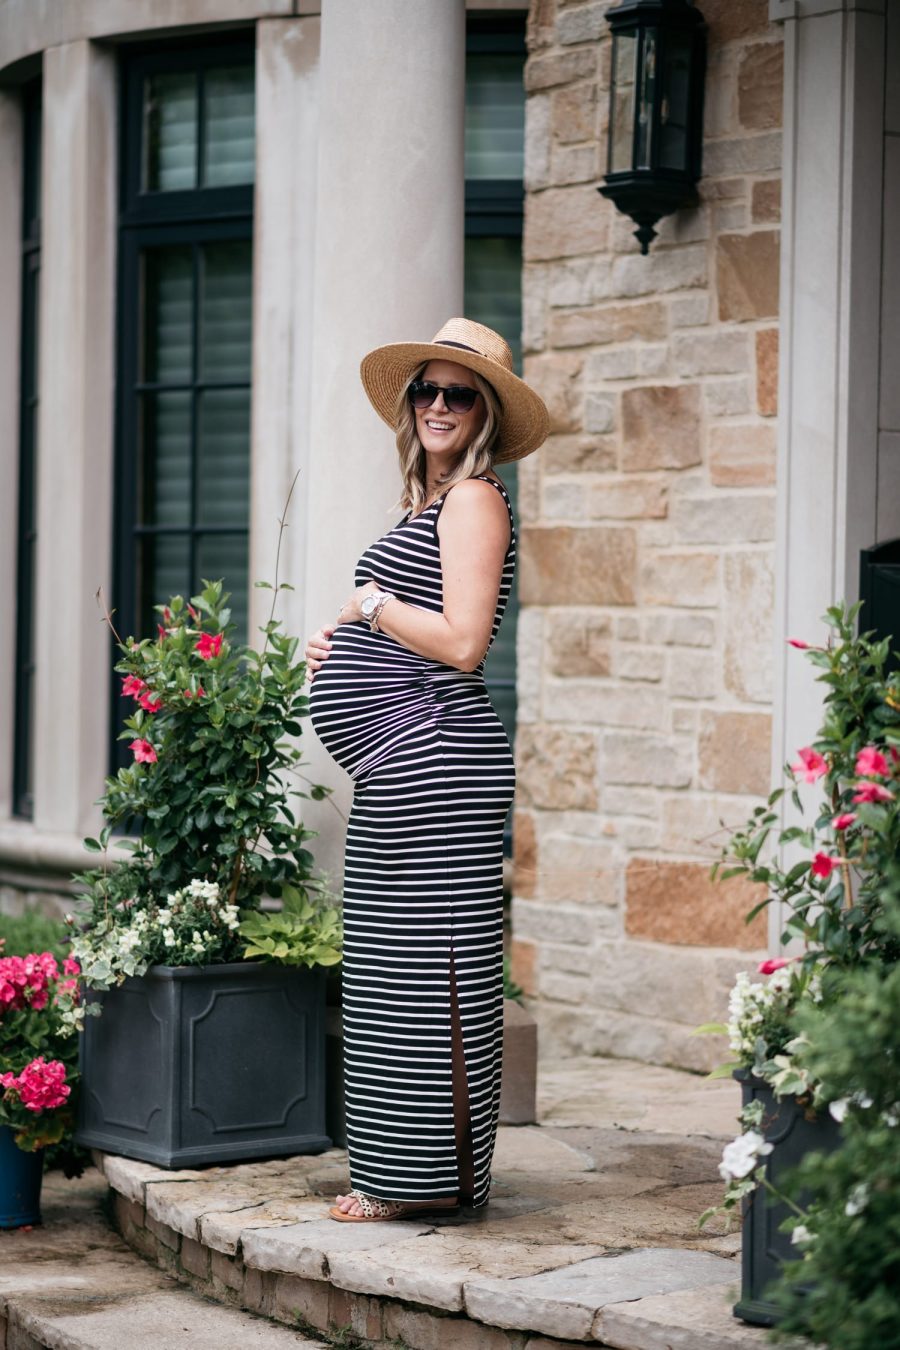 Maternity style: maxi dress and hat